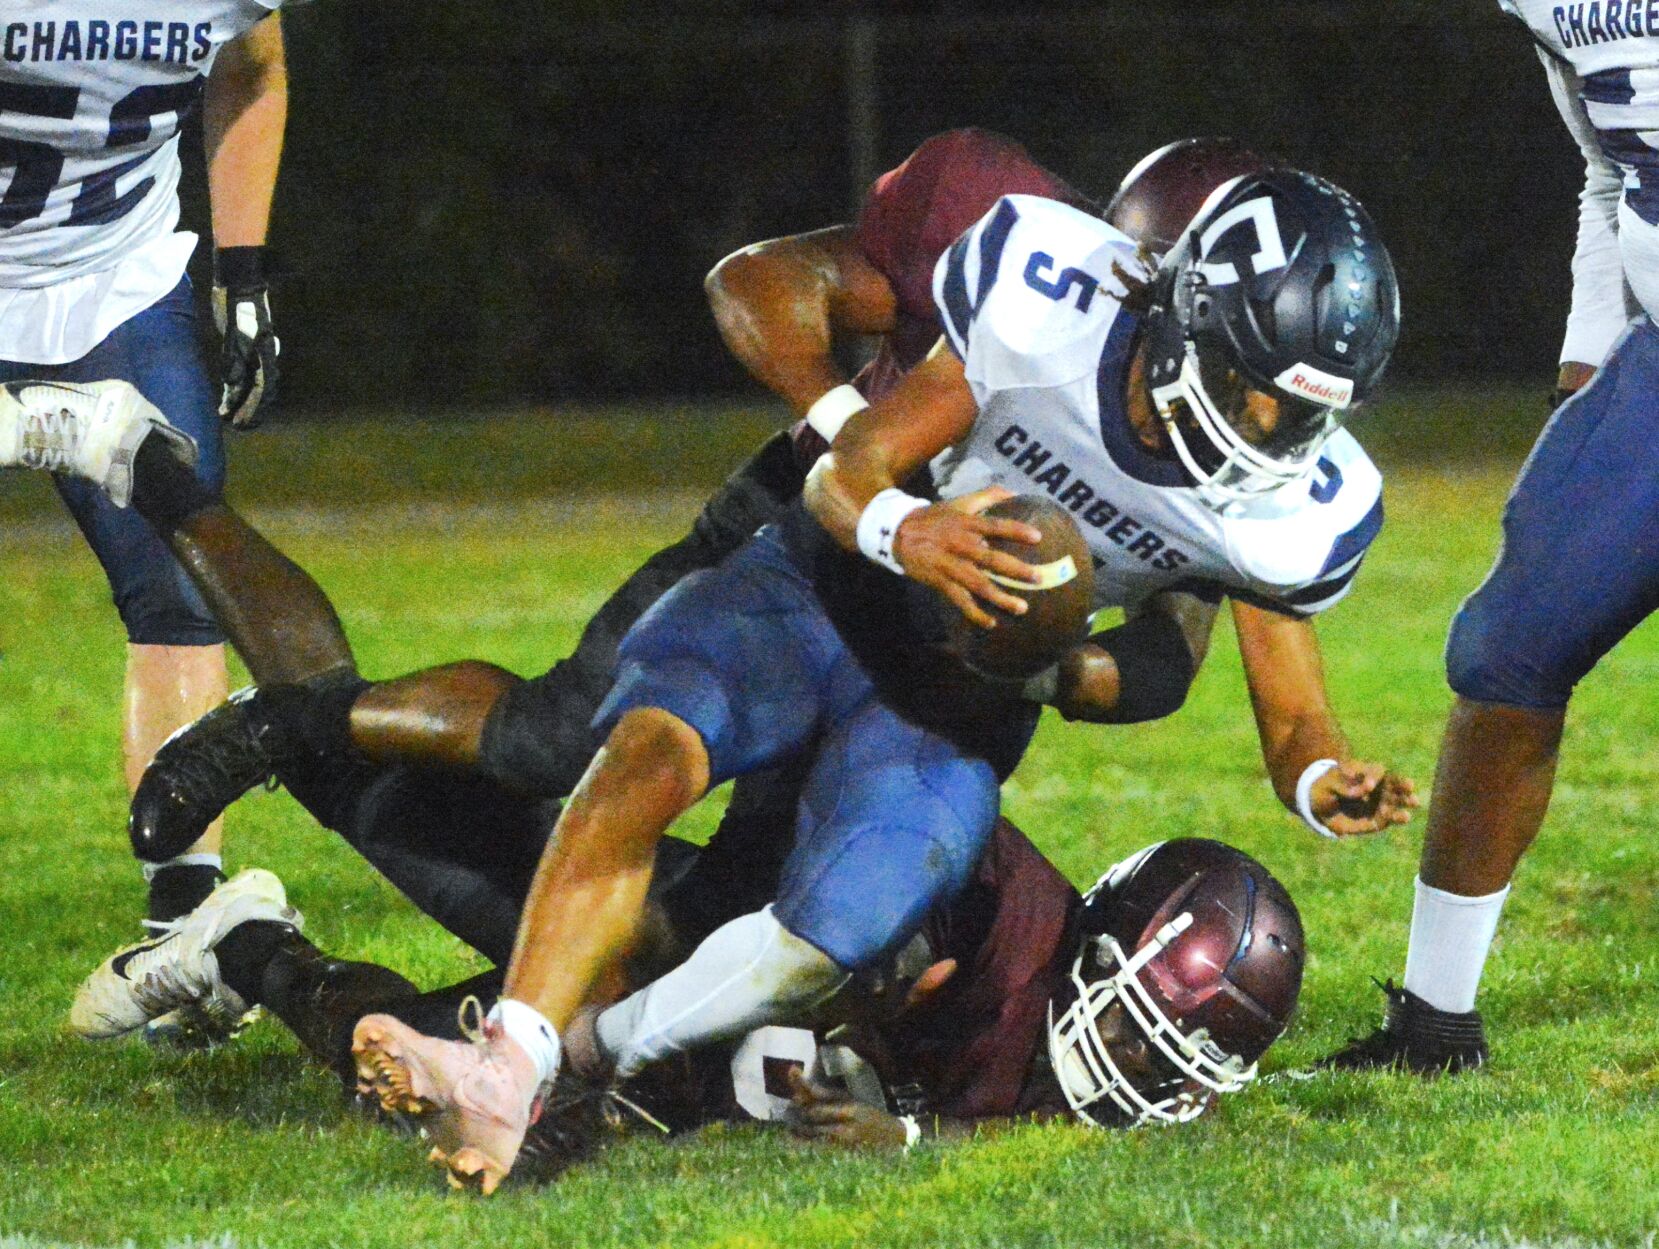 Danville Vikings Pull off Upset Victory Against Champaign Centennial Chargers